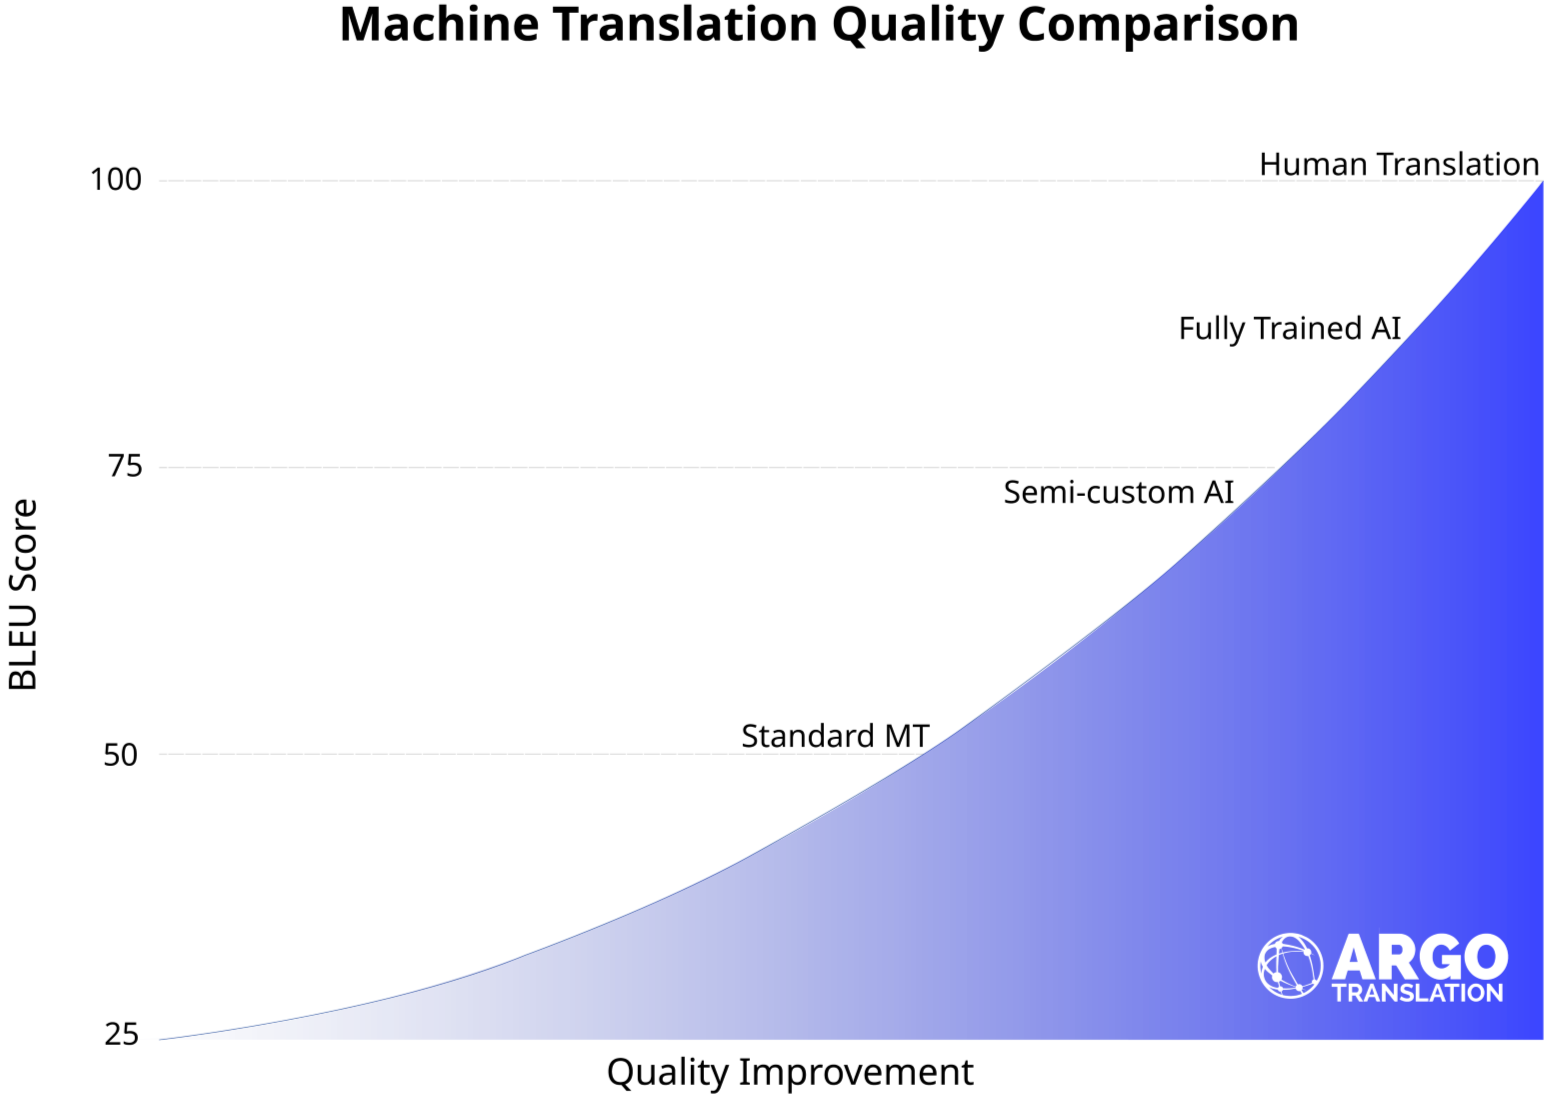 Graph comparing machine translation quality using BLEU scores, ranging from Standard MT to Fully Trained AI and Human Translation, showing improvement in quality from left to right.